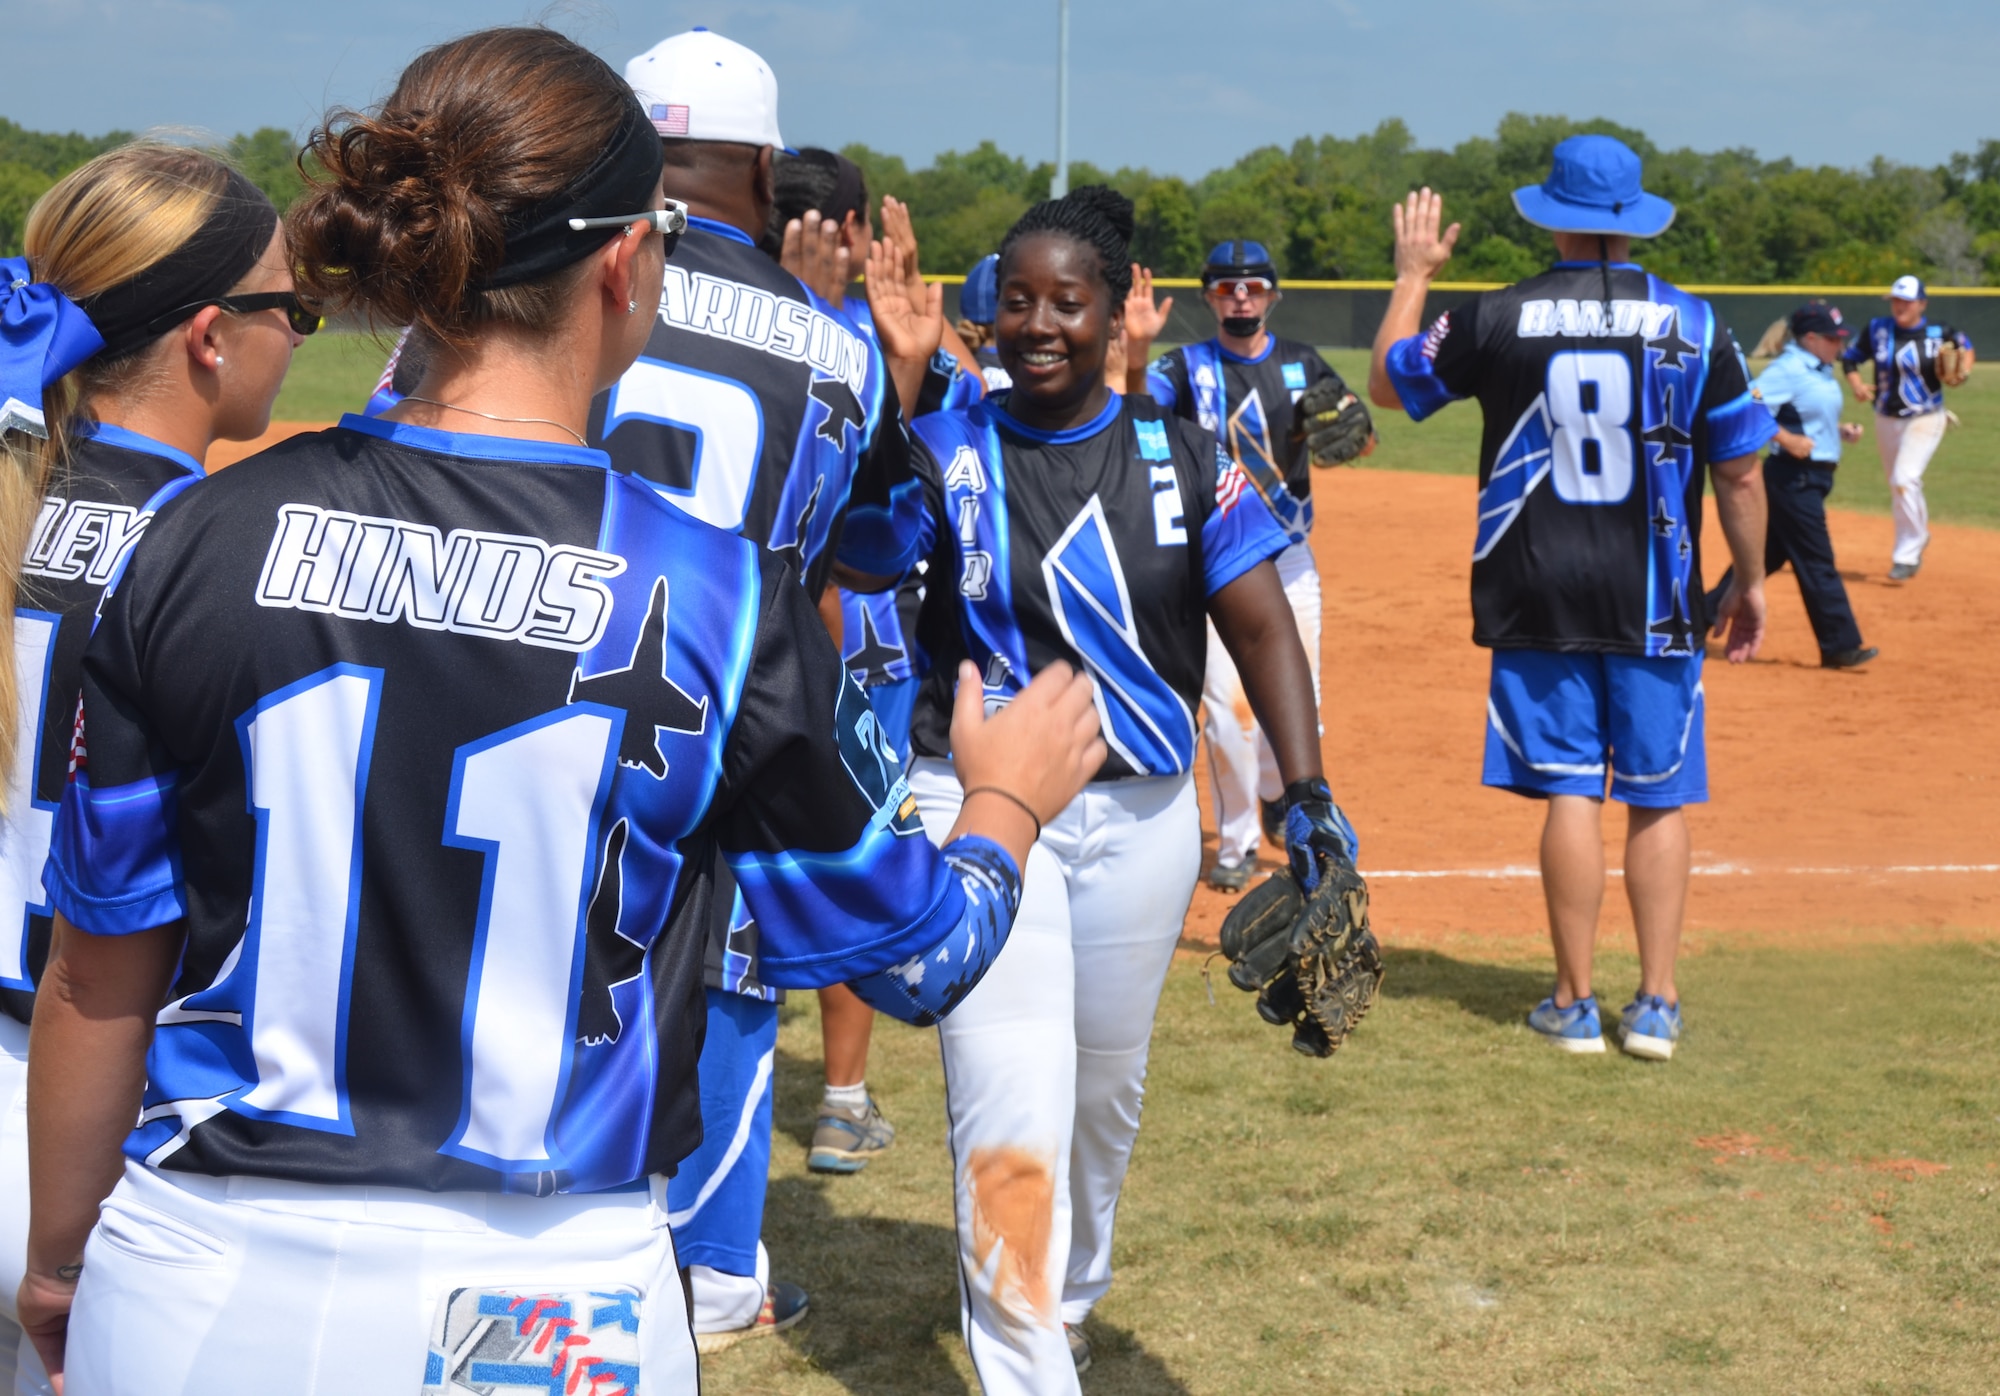 Tech. Sgt. Shameka White and her All-Air Force women's softball teammates celebrate a victory over the Army during the Armed Forces Championships in September on Joint Base San Antonio-Fort Sam Houston. (U.S. Air Force photo by Steve Warns)